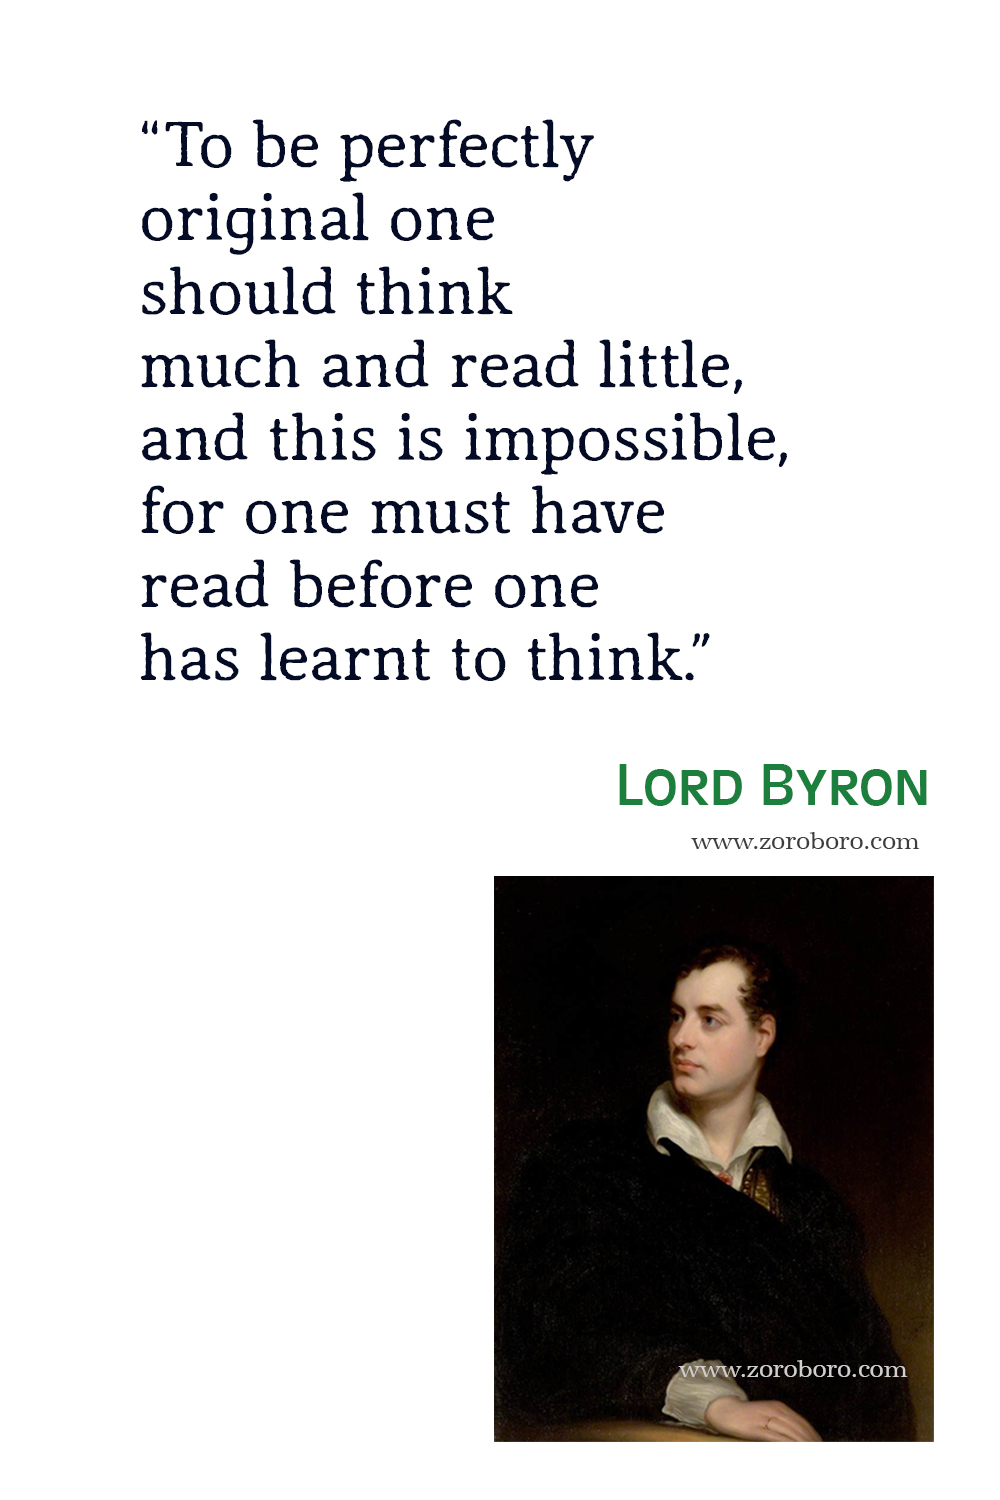 Lord Byron Quotes, Poet, Poetry, Lord Byron Poems, Lord Byron Books Quotes, Lord Byron : Selected Poems, Lord Byron Love, Nature Quotes.